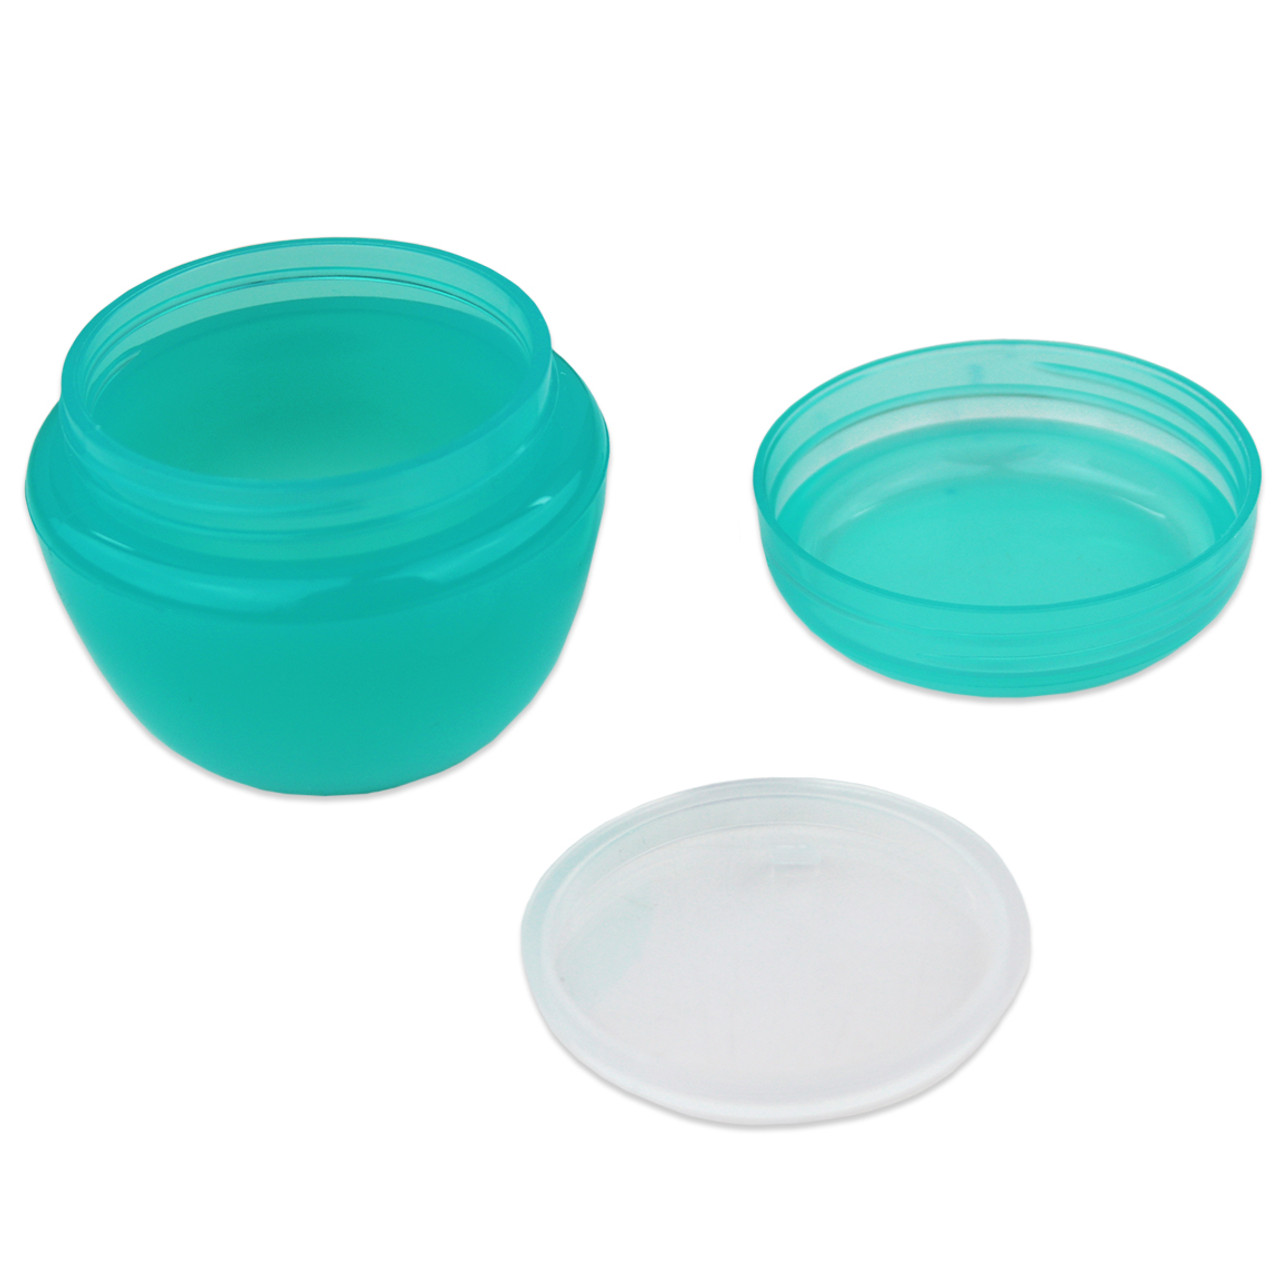 50g/50ml (1.7 oz) Plastic Cosmetic Sample Jars (Frosted)